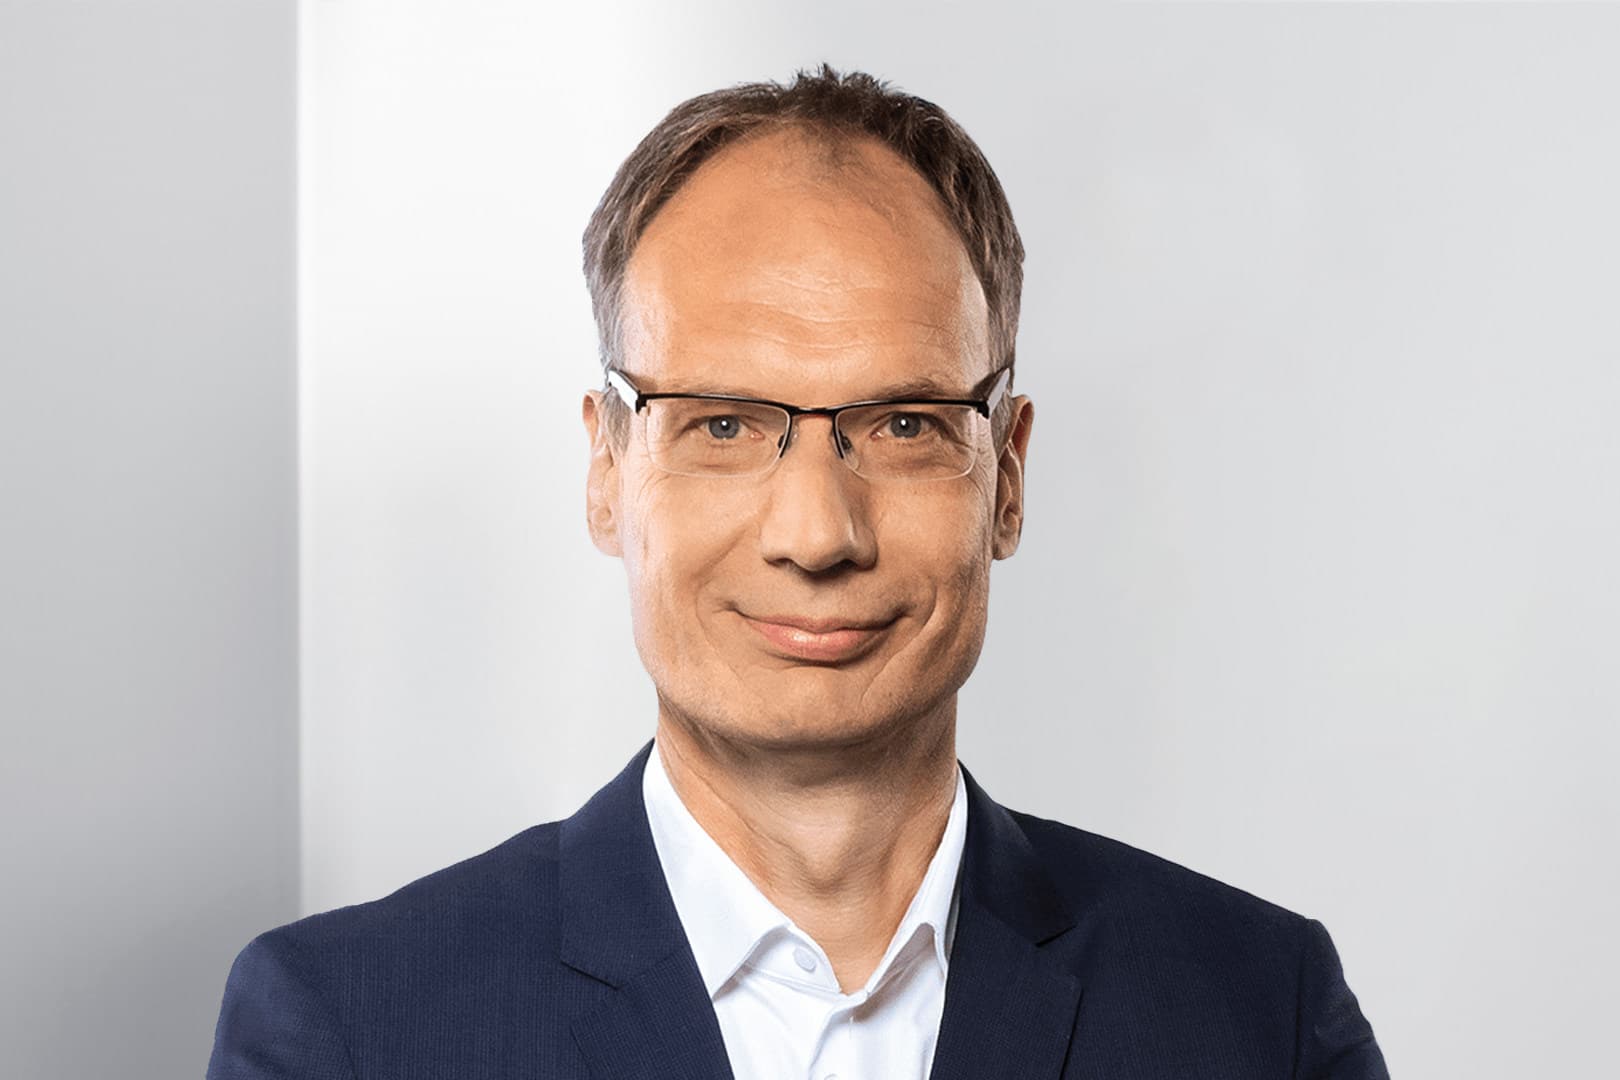 Nikola Corporation (Nasdaq: NKLA), a global leader in zero-emissions transportation and energy infrastructure solutions, today announced that Michael Lohscheller has been named President of Nikola Motor.